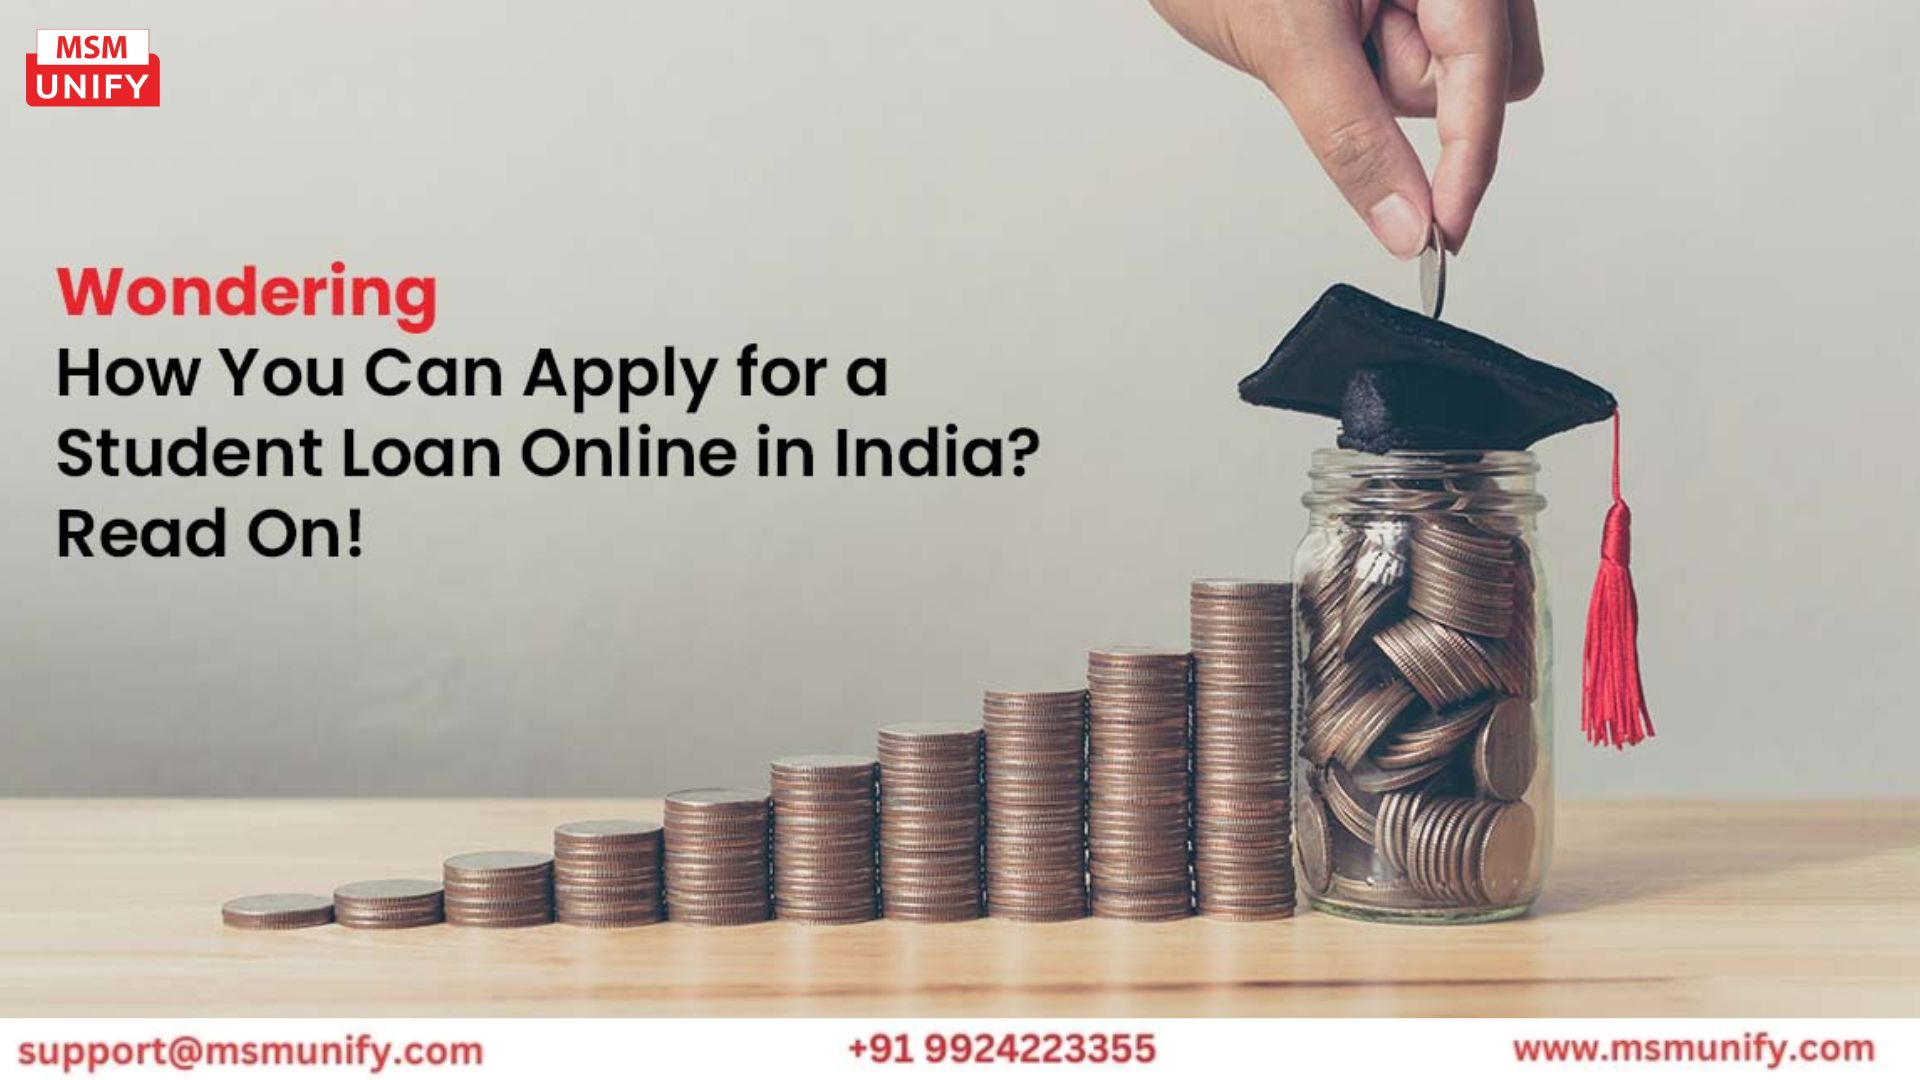 Open the door to a world-class education! Seamlessly apply for your <a href=" https://www.msmunify.com/blogs/education-loan-above-20-lakhs/ 
">education loan online</a> in India, ensuring a hassle-free journey to studying abroad. Your dreams deserve the best support. Let's make it happen!
